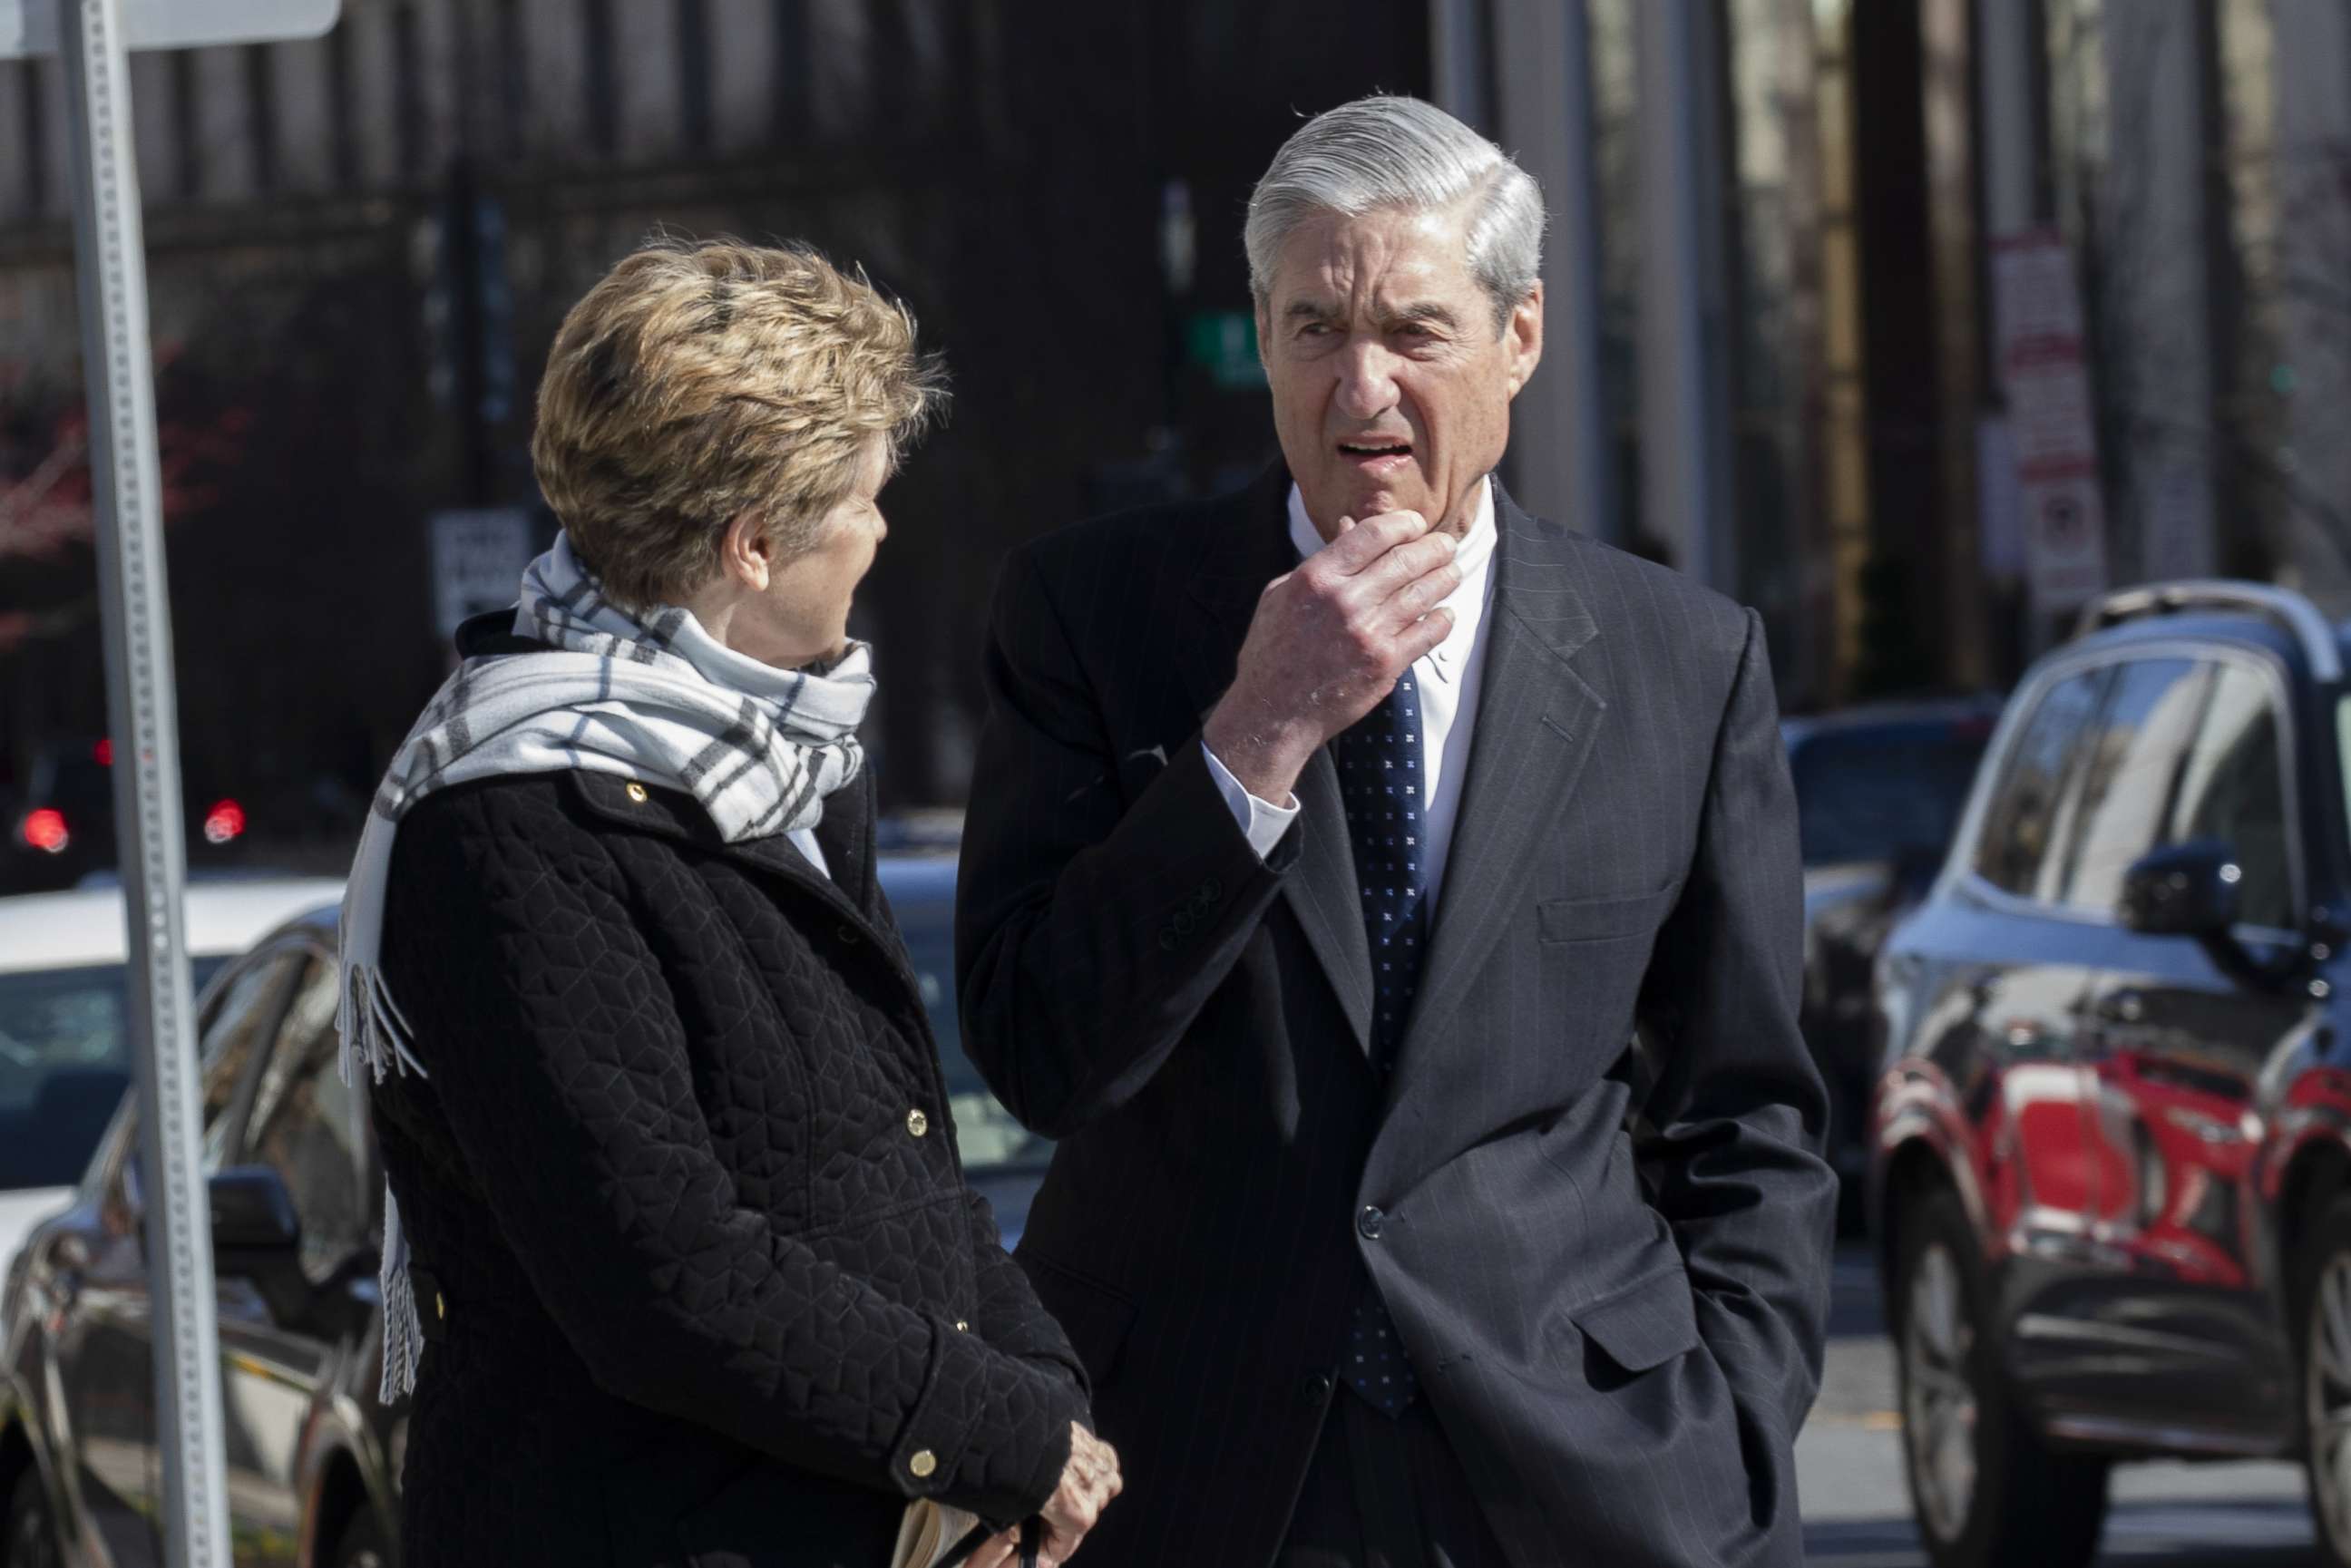 PHOTO: Special Counsel Robert Mueller is pictured on March 24, 2019, in Washington, D.C.